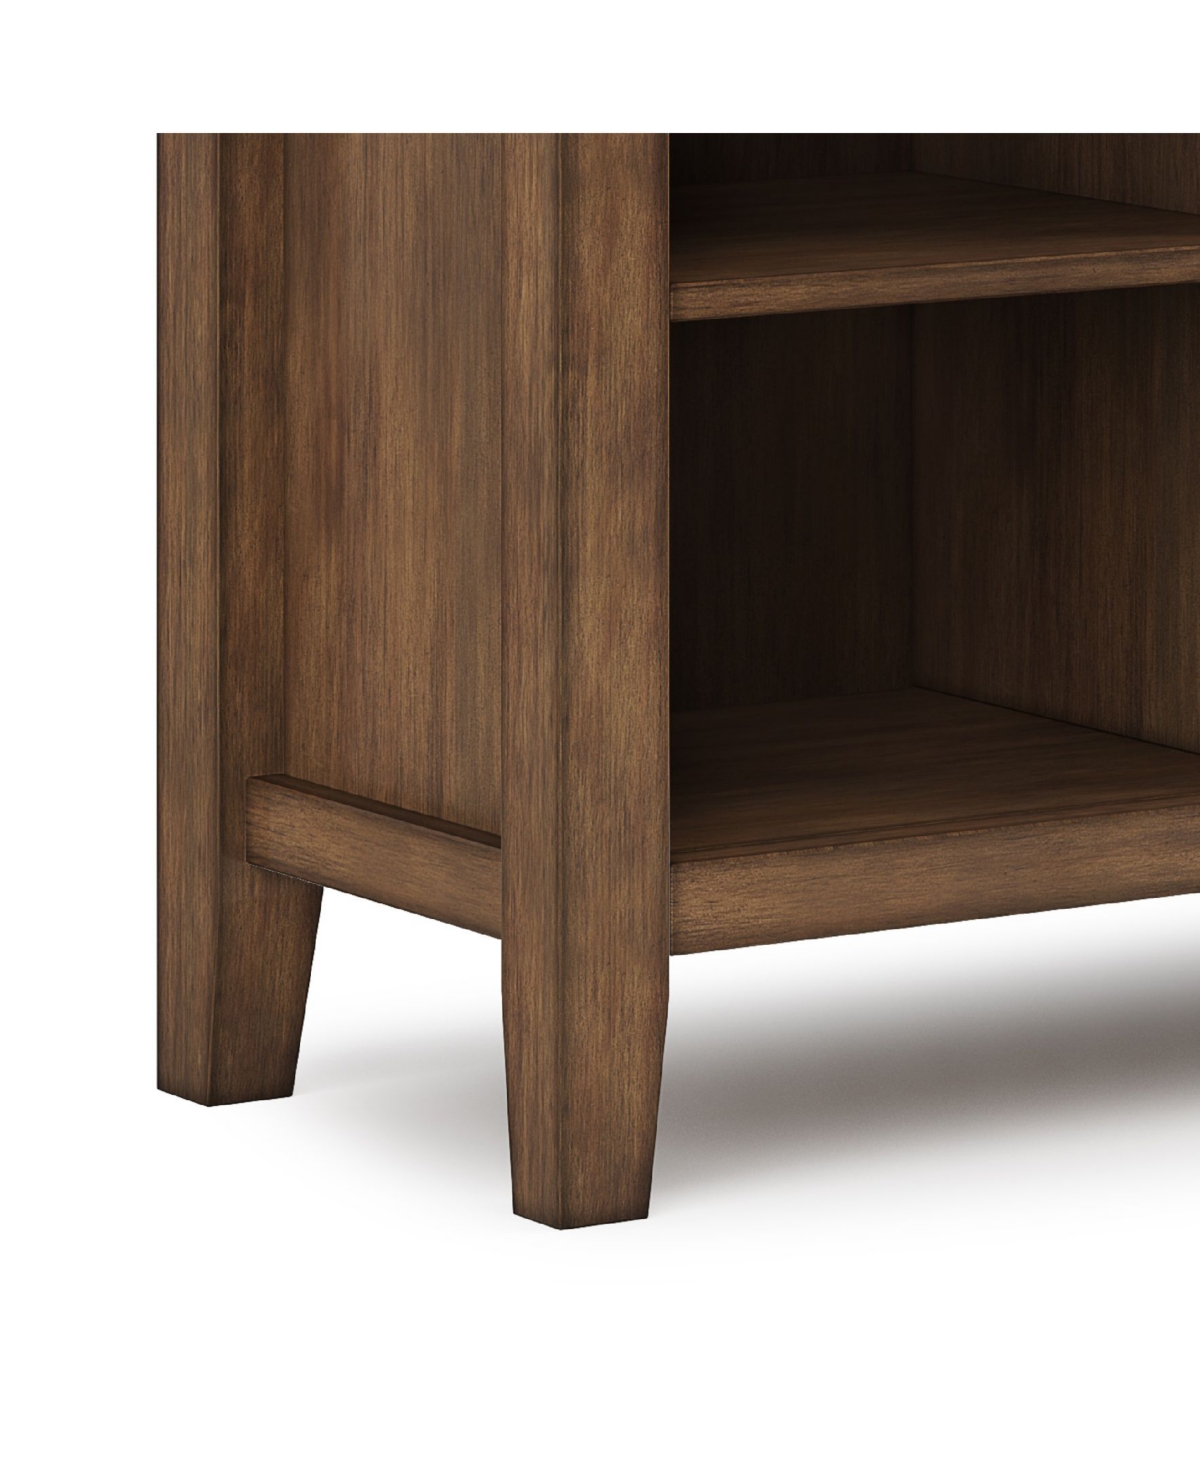 Shop Simpli Home Redmond Solid Wood Tv Media Stand With Open Shelves In Rustic Natural Brown